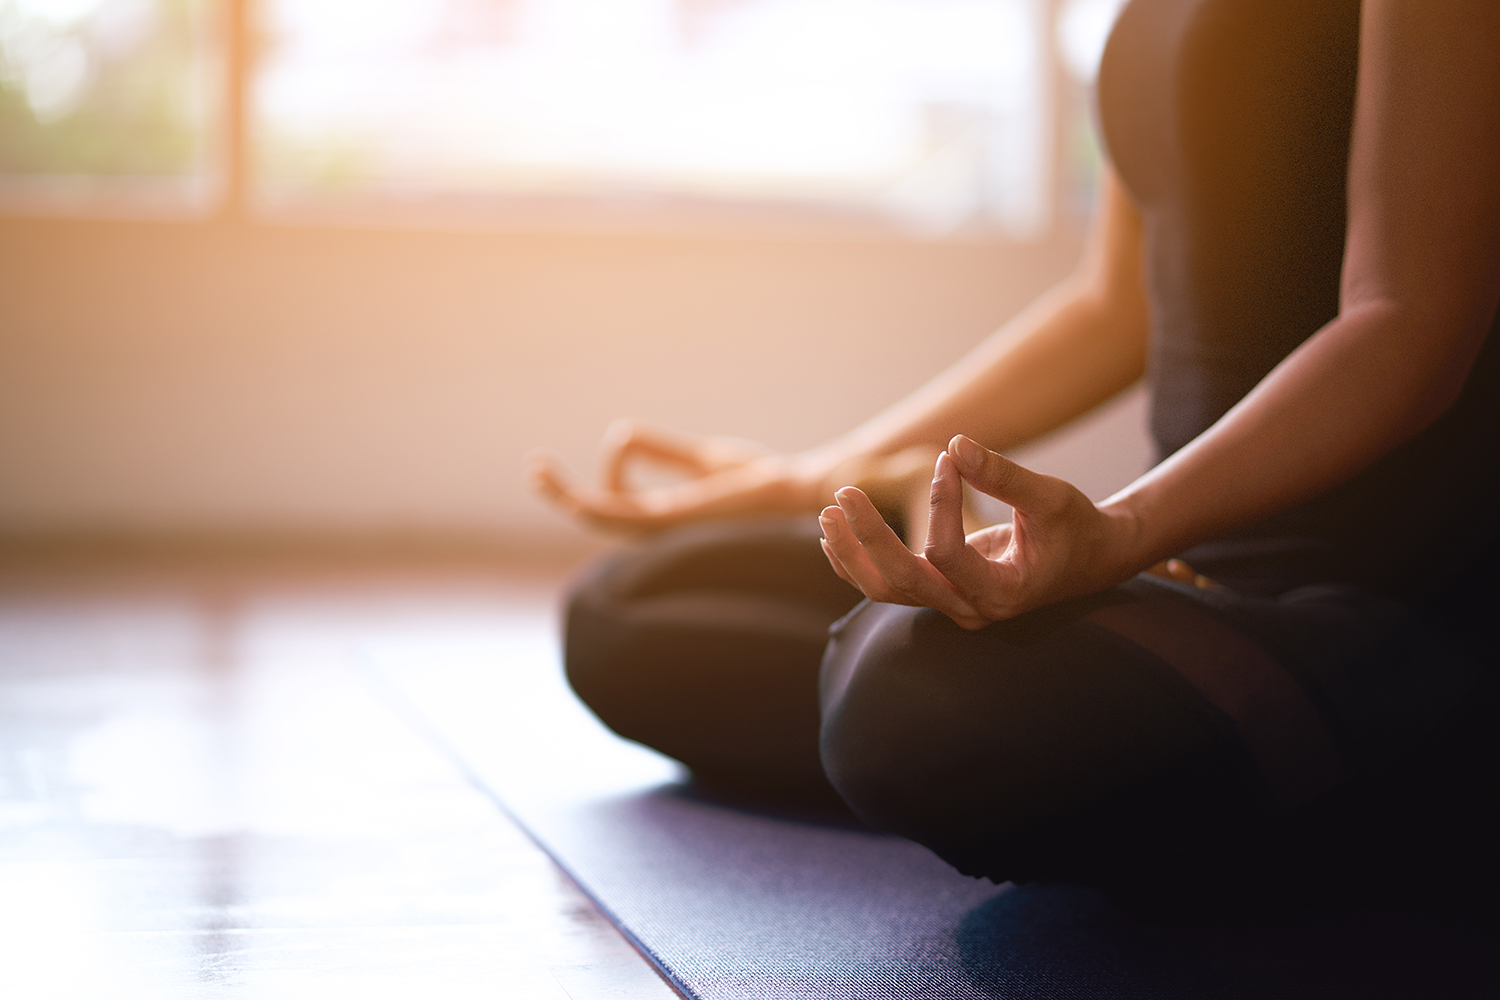 Yoga Shown to Improve Anxiety, Study Finds